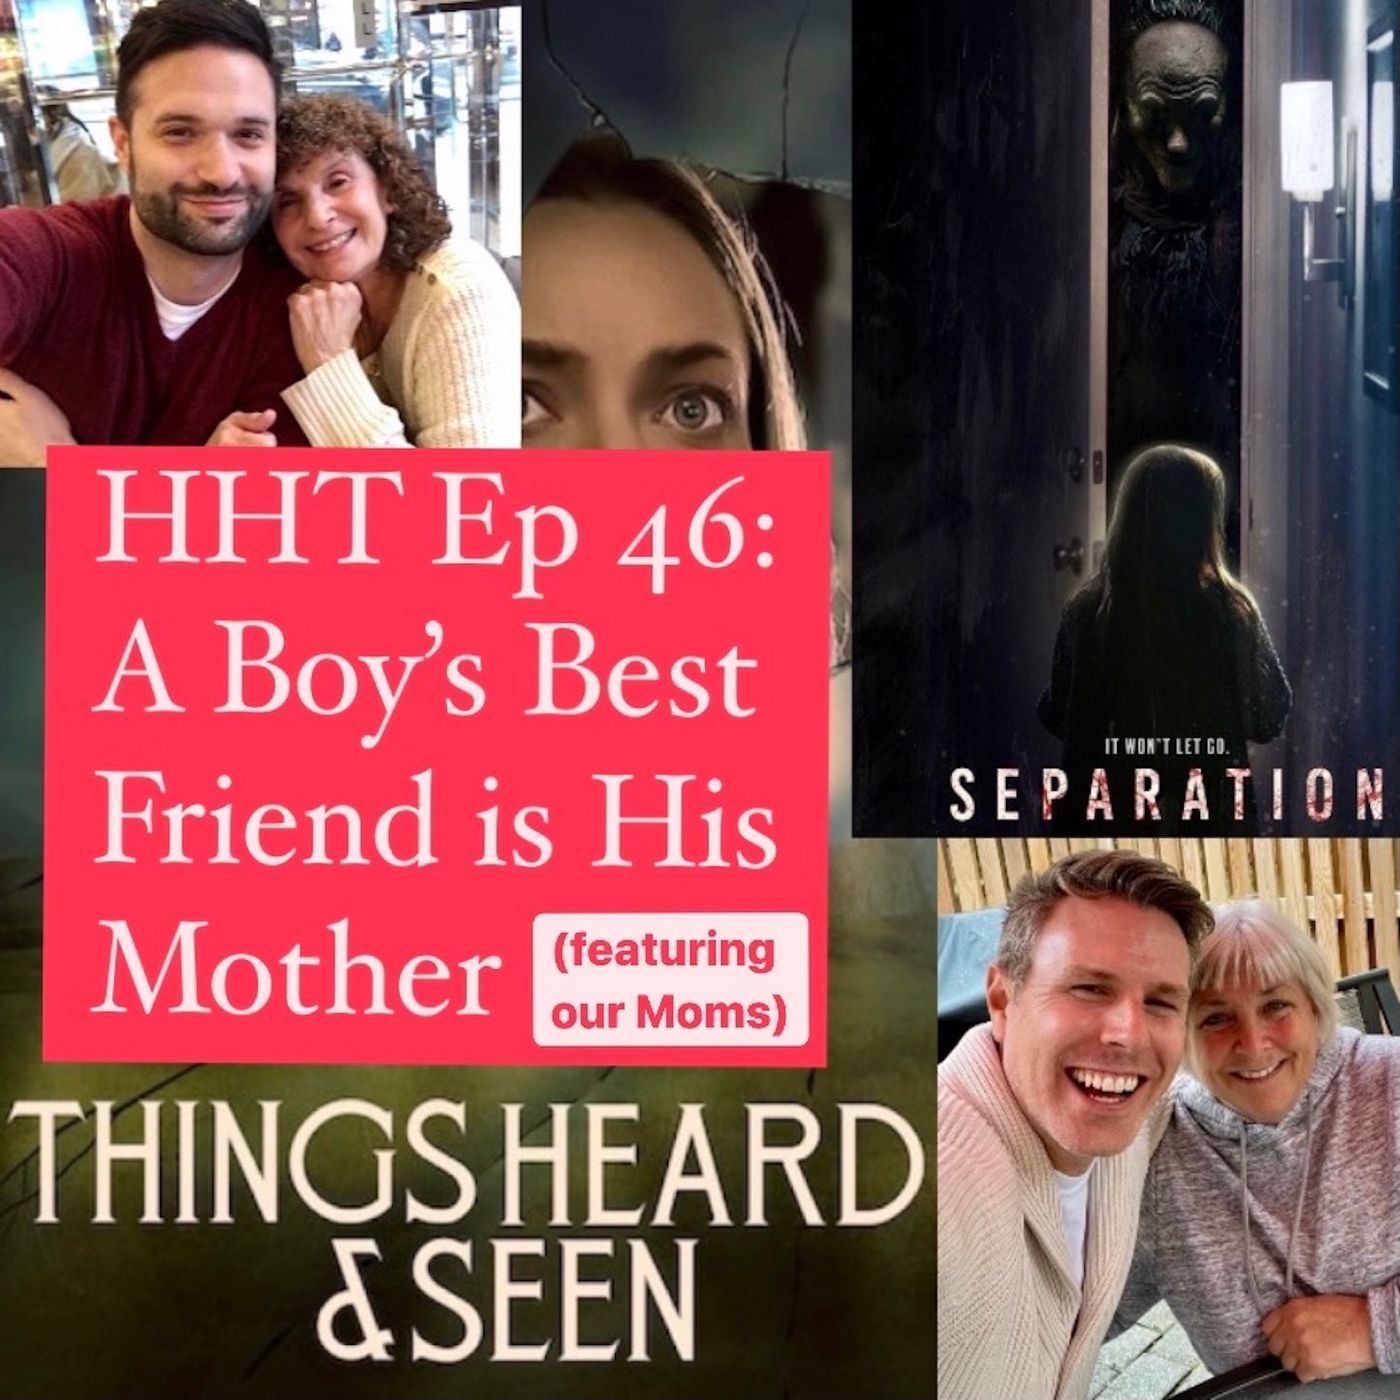 Ep 46: A Boy's Best Friend is His Mother (featuring our Moms)